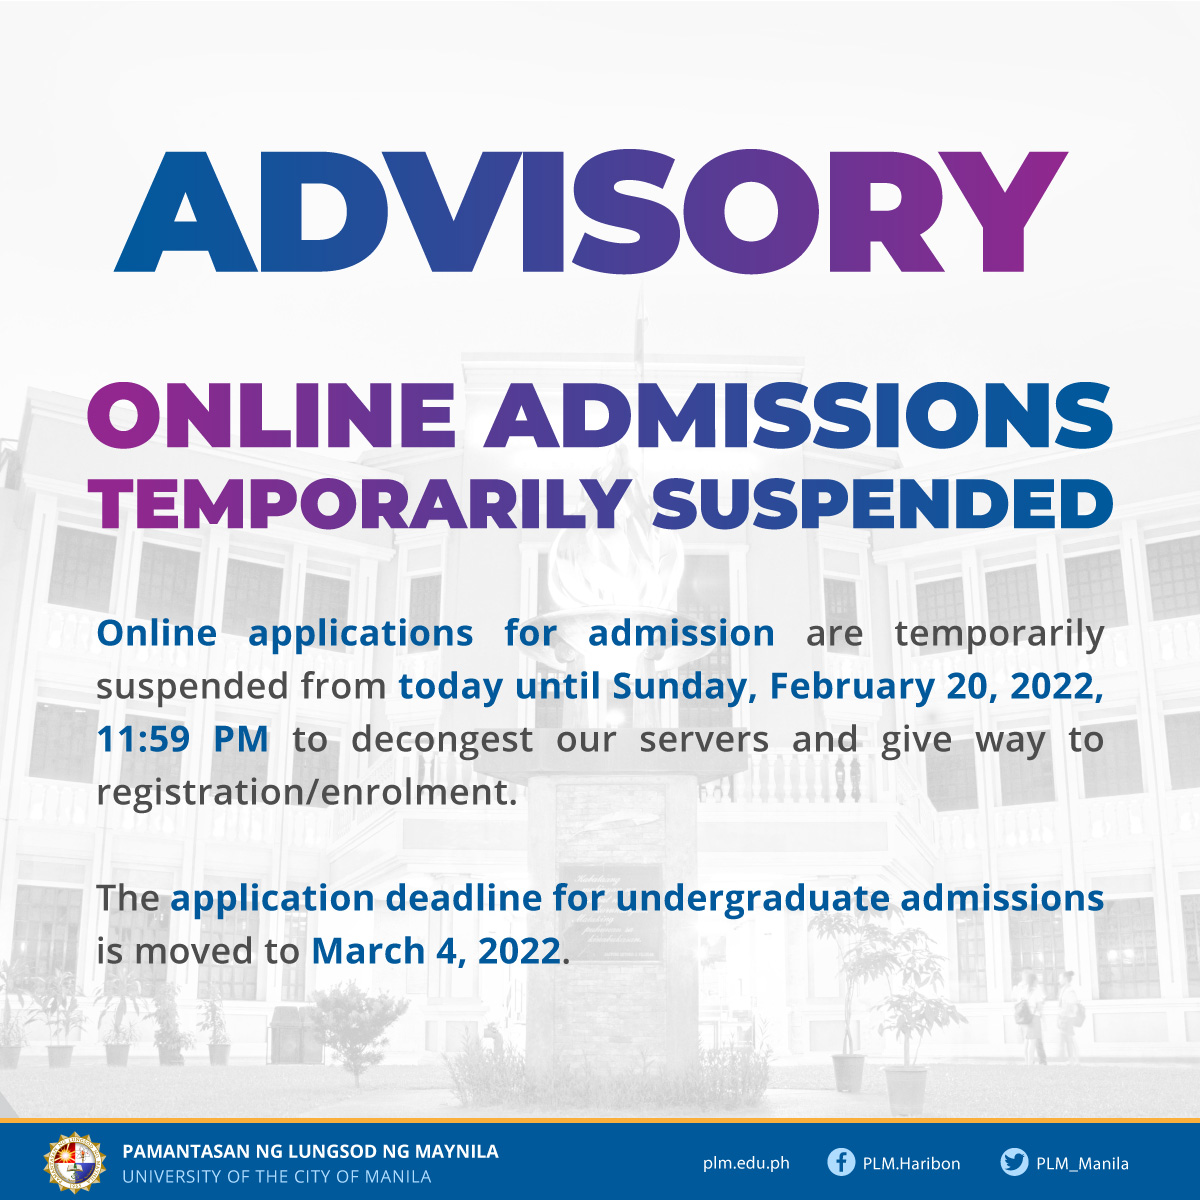 Online applications for admission are temporarily suspended to decongest our servers and give way to registration/enrolment.